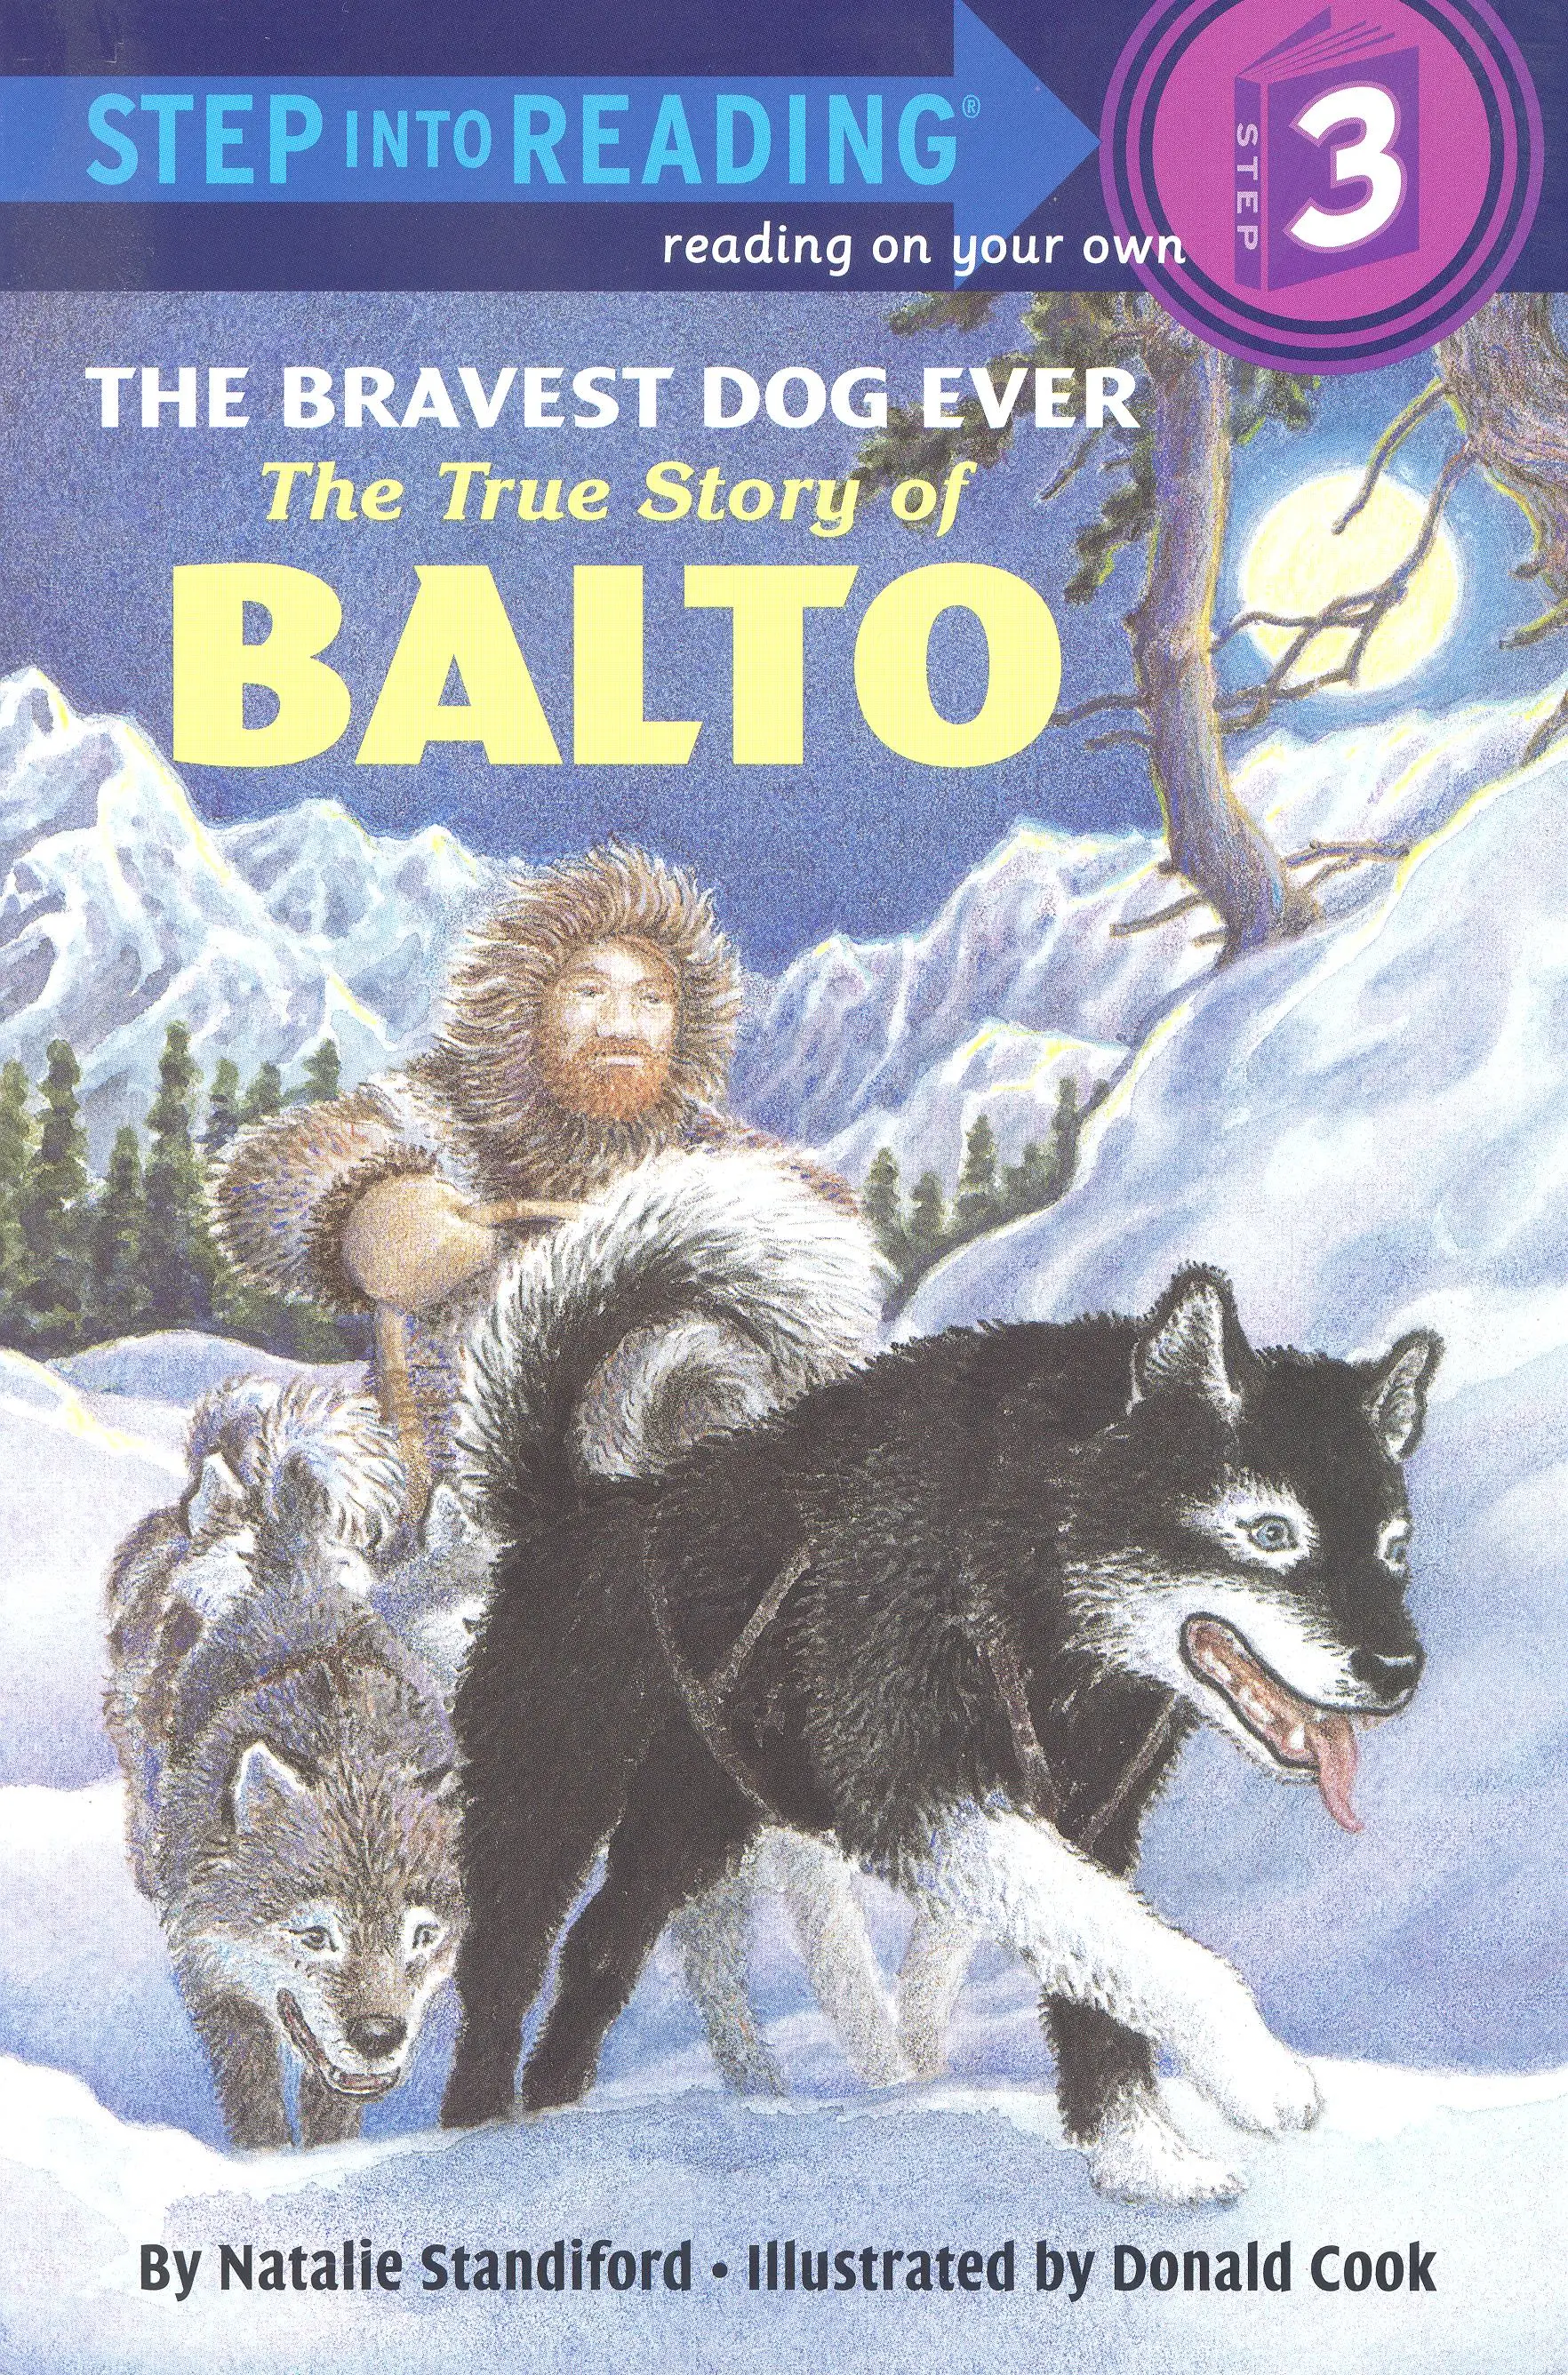 The Bravest Dog Ever A True Tale of Heroism and Loyalty